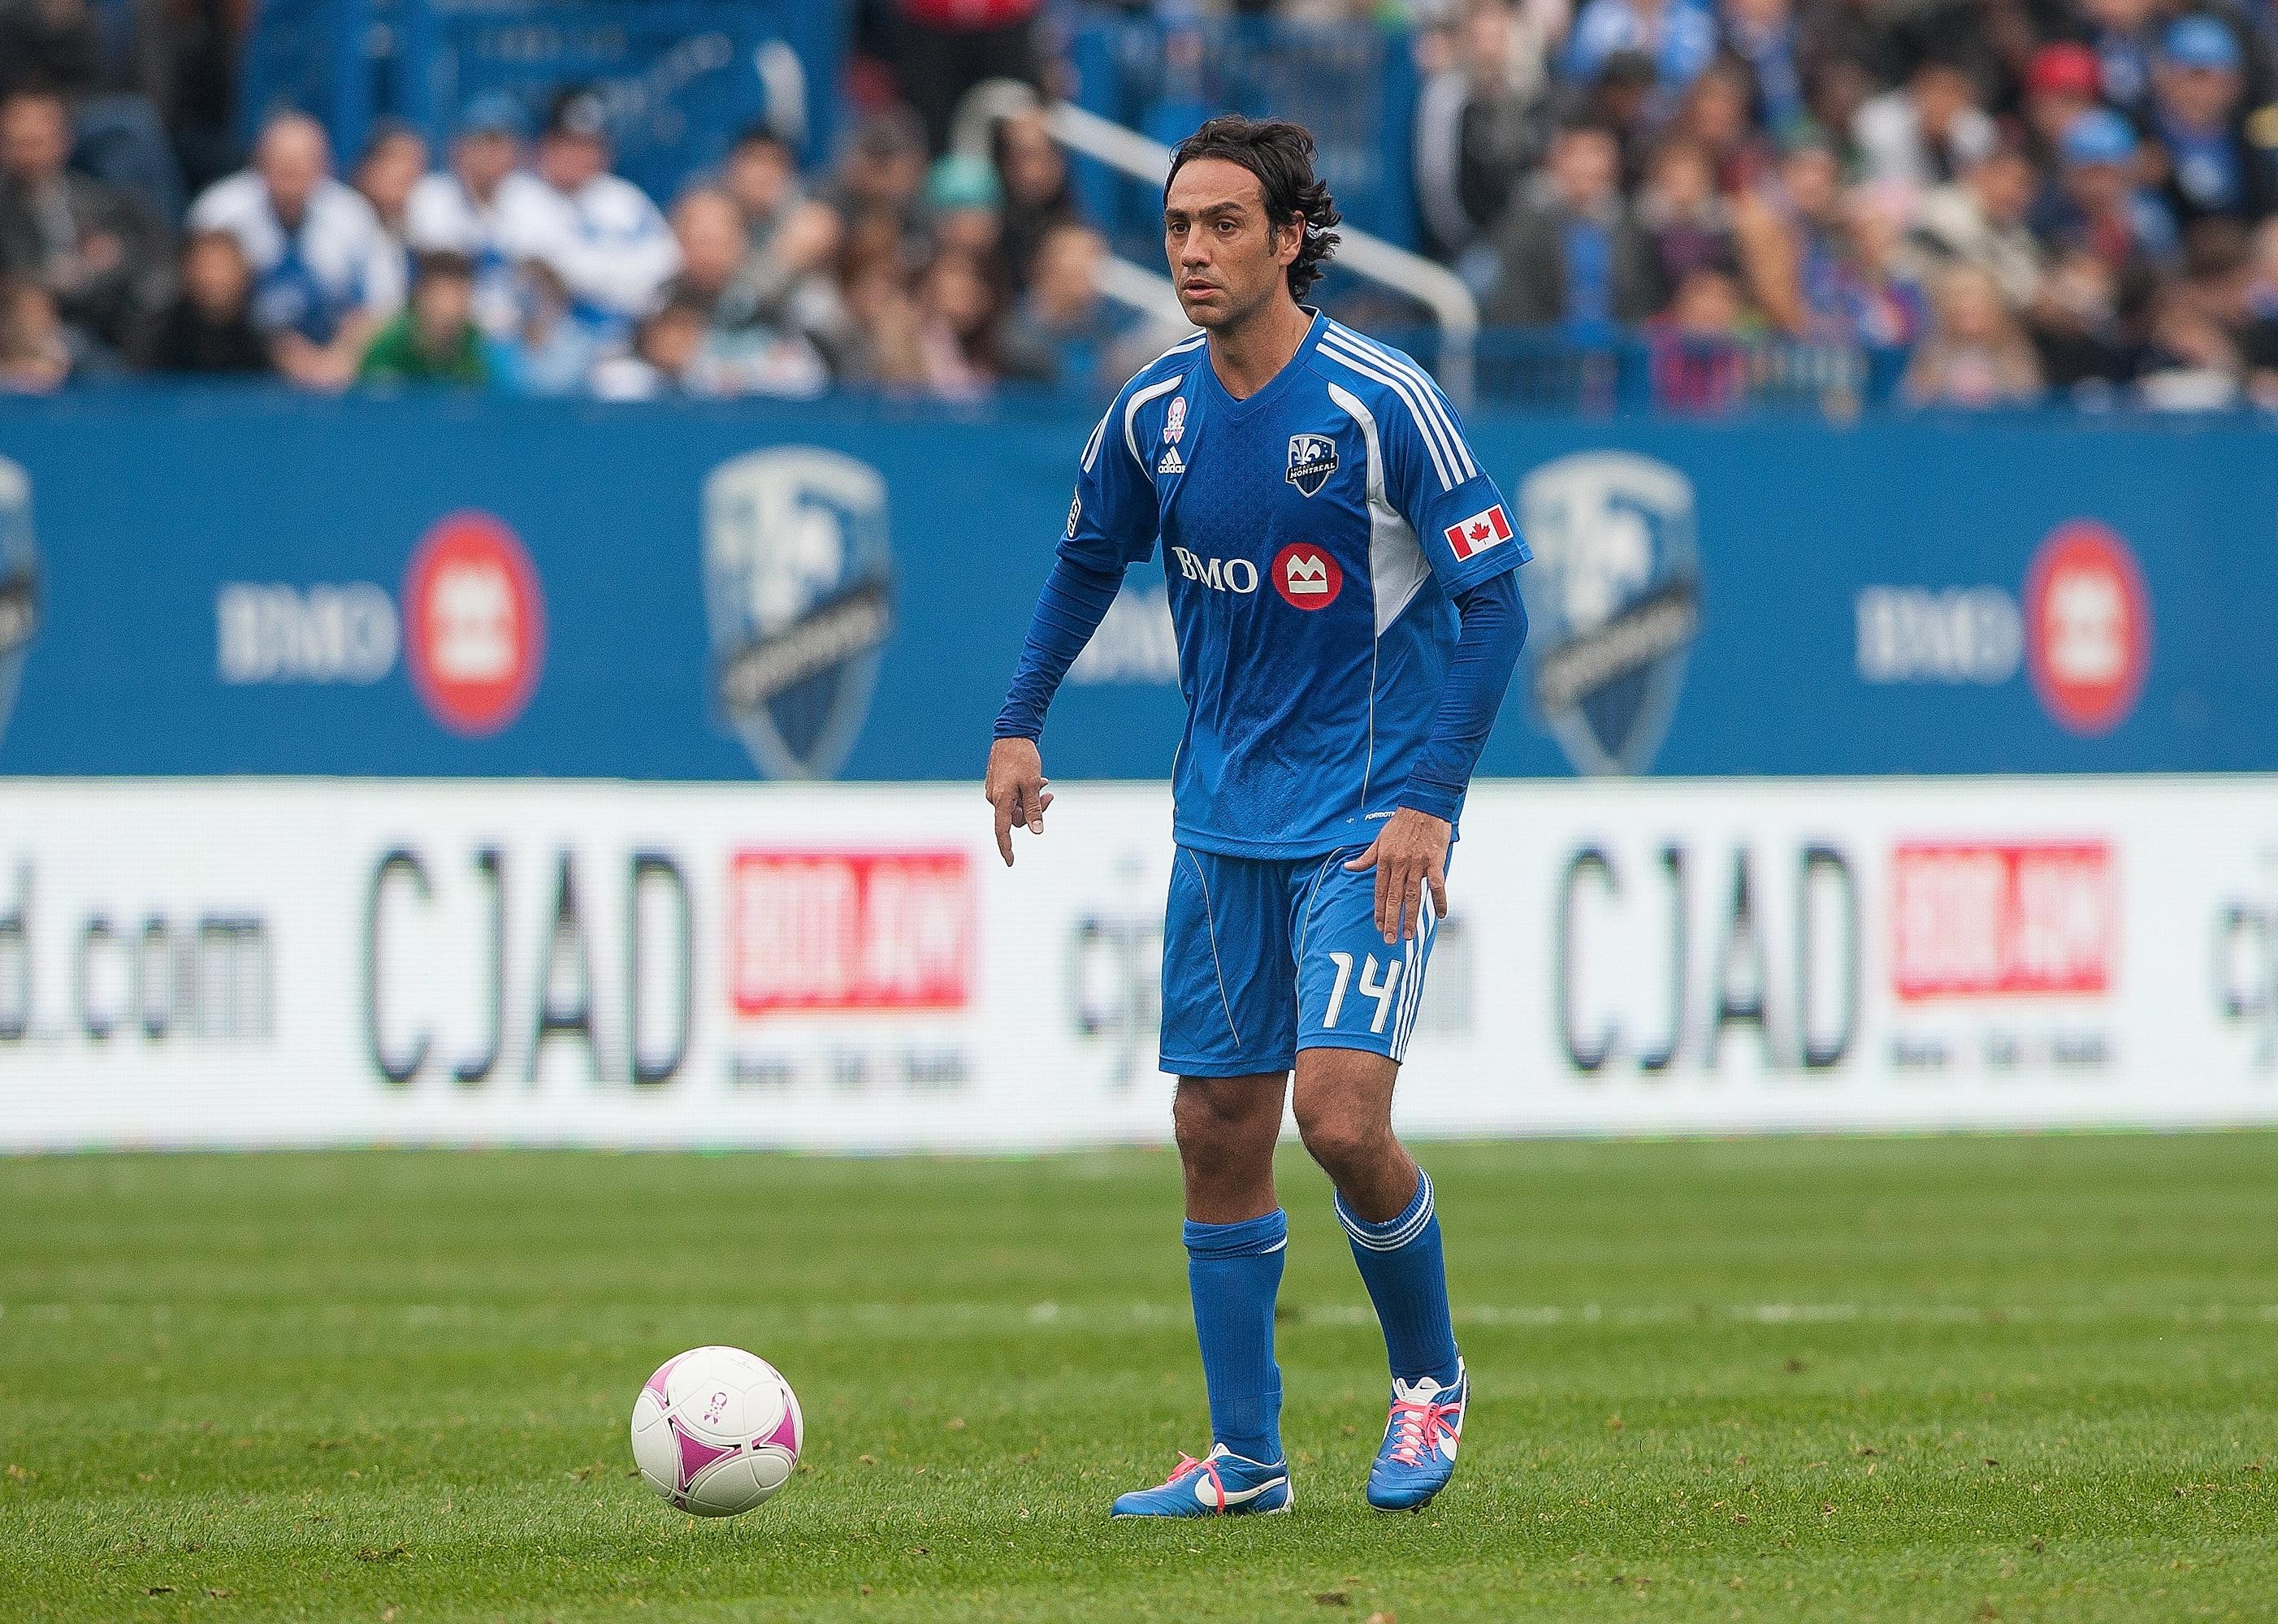 Alessandro Nesta of the Montreal Impact controls the ball in a game.